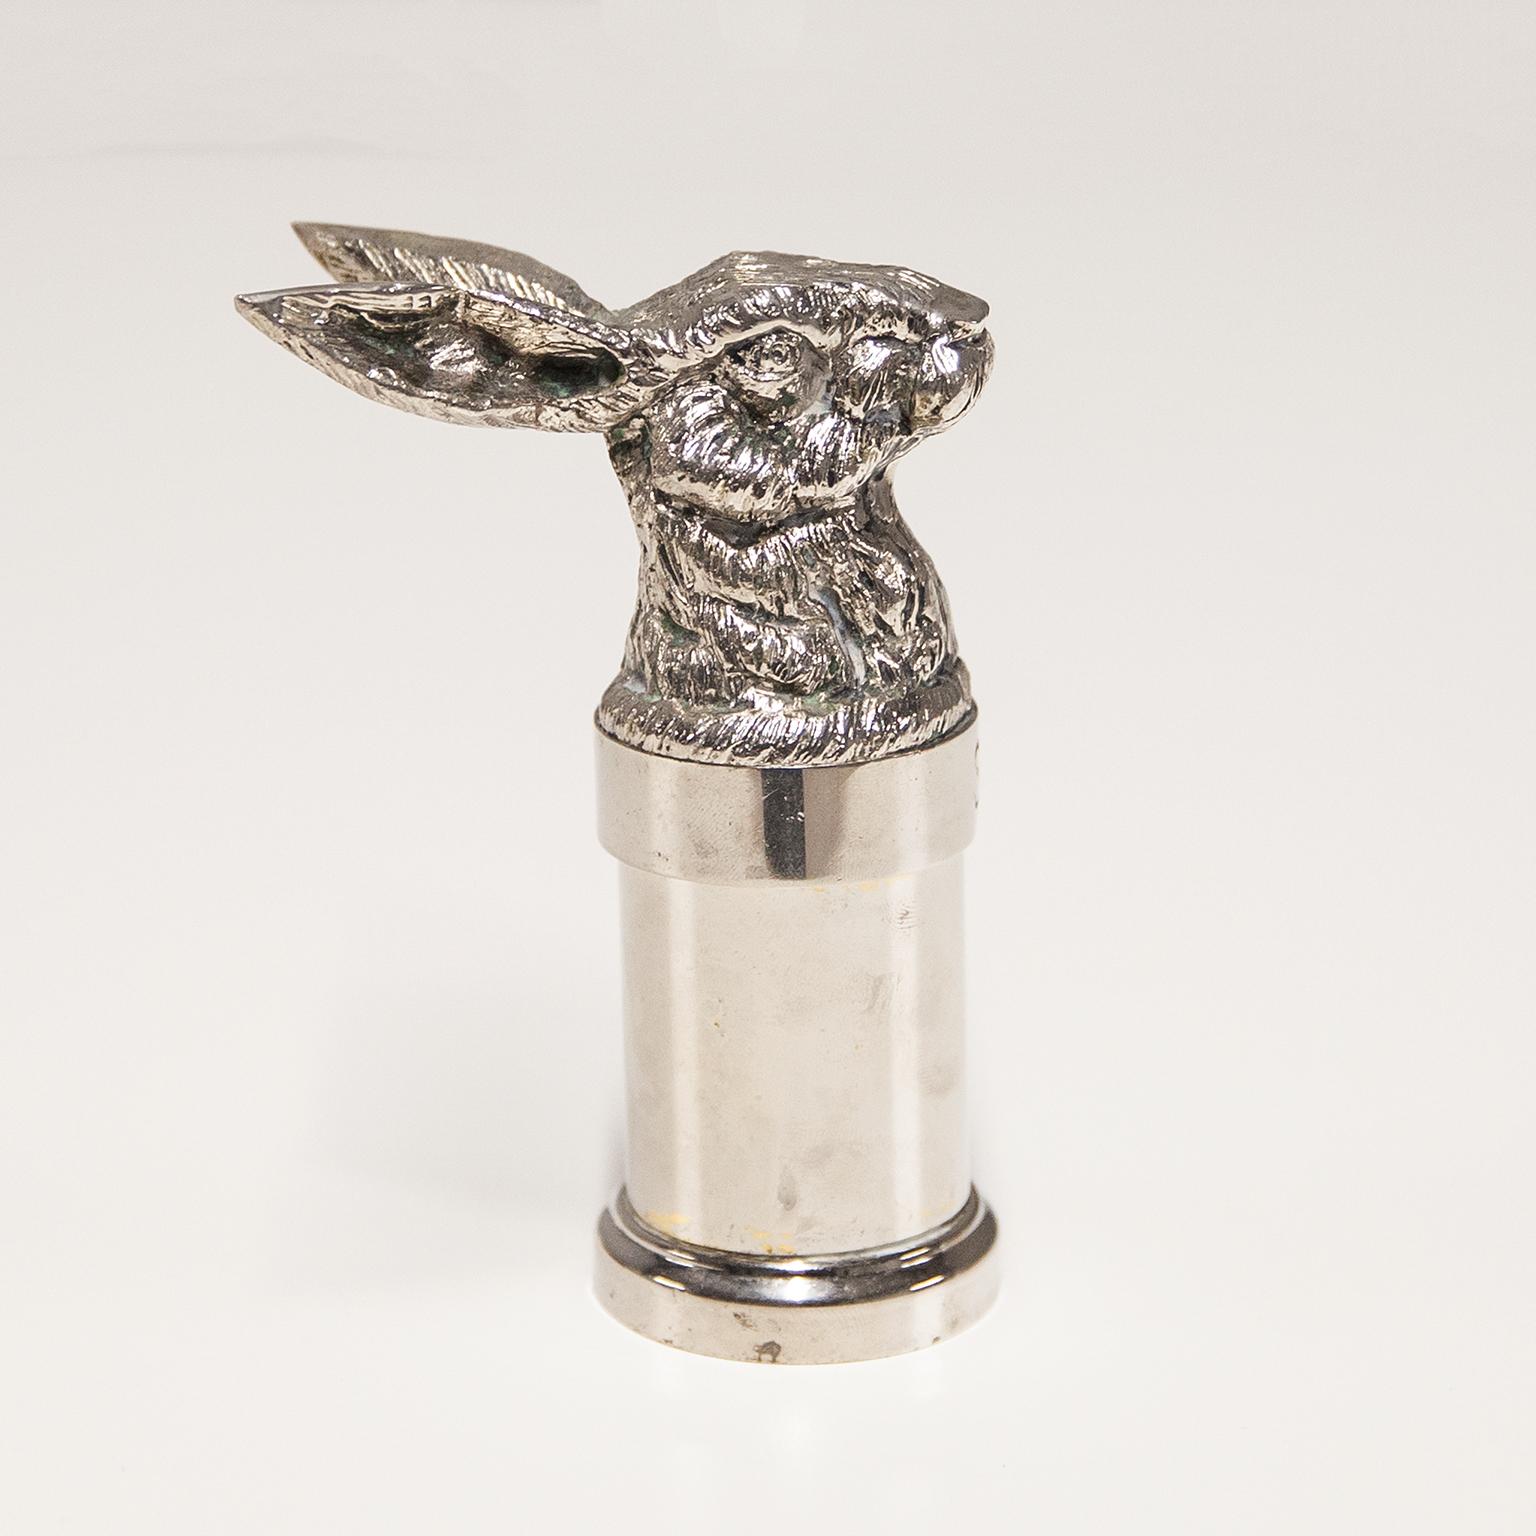 Gucci vintage salt and pepper mill in the design of a rabbit head in silver plated metal and in very good vintage condition. Signed Gucci.